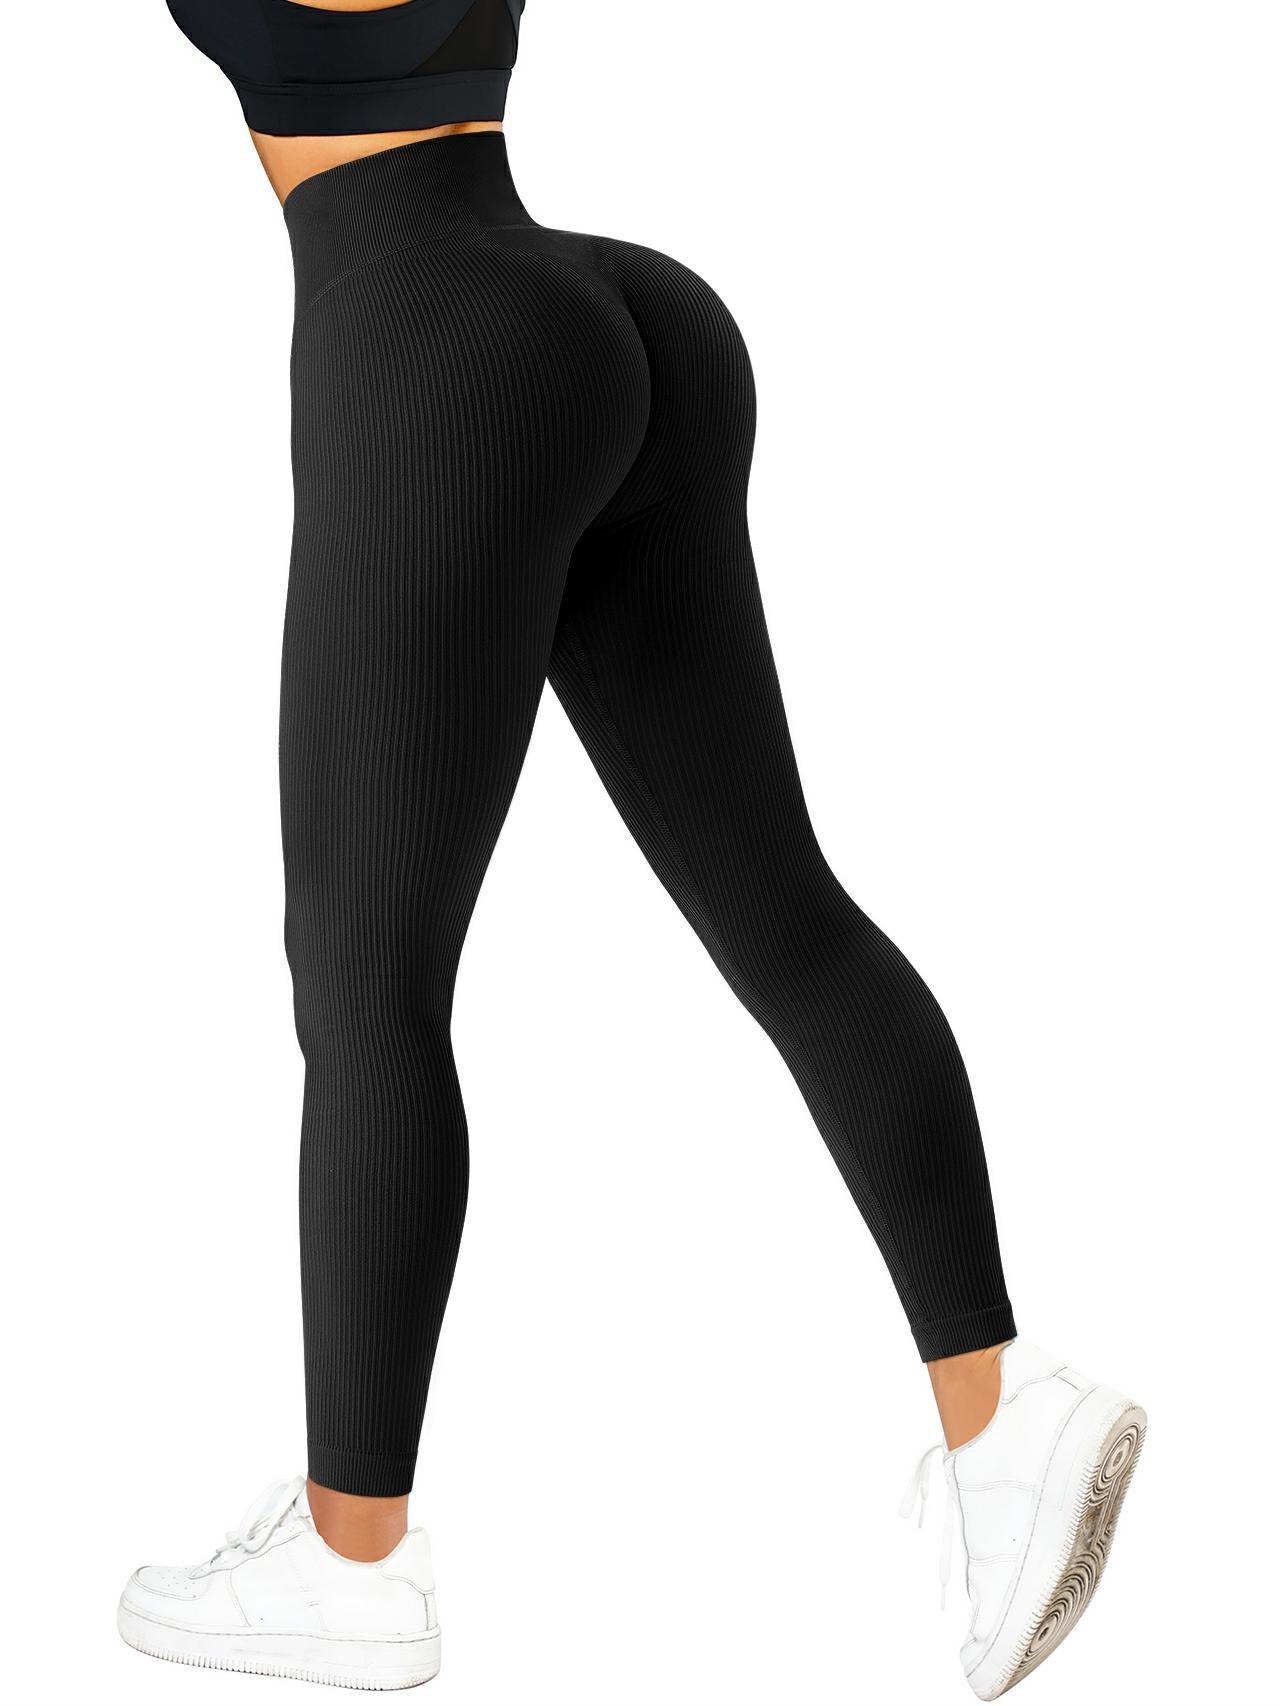 Best seamless tights, Scrunch and ribbed